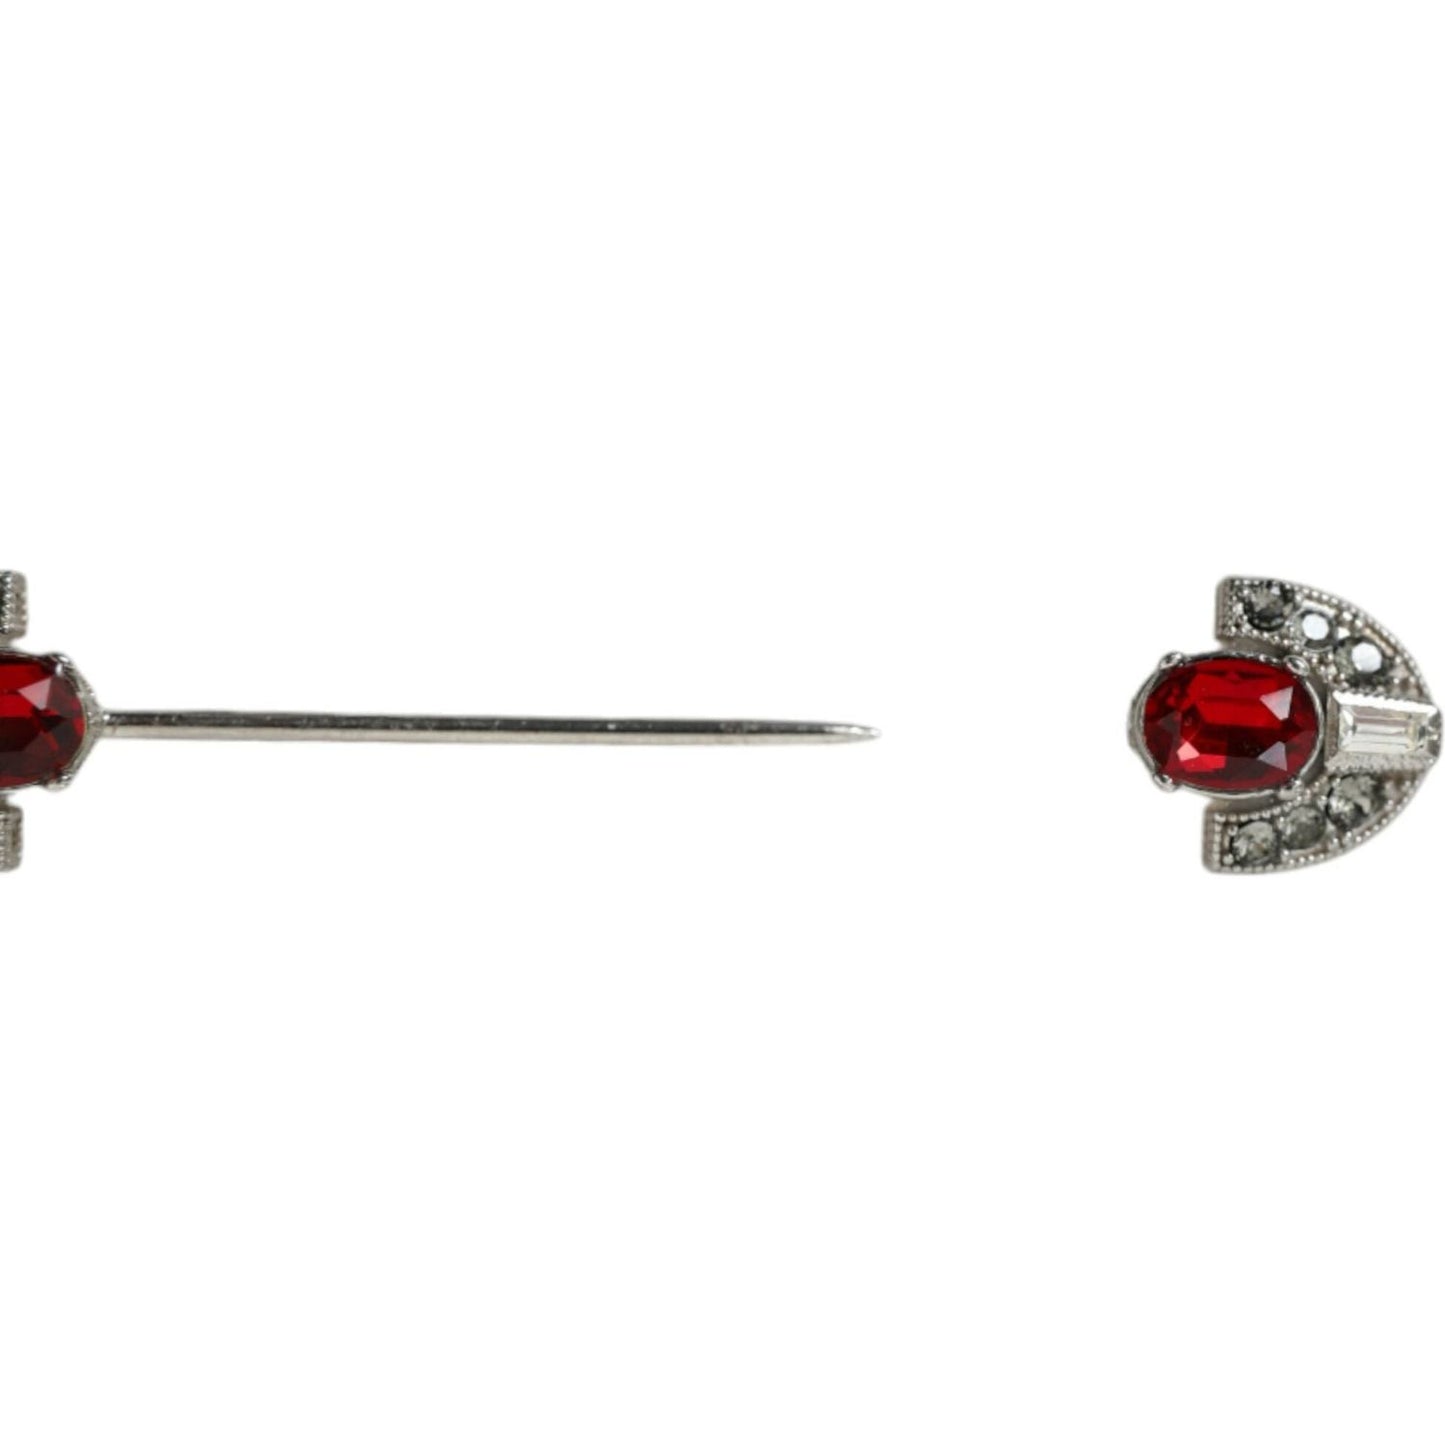 Dolce & Gabbana 925 Sterling Silver Crystals Pin Collar Brooch 925-sterling-silver-crystals-pin-collar-brooch